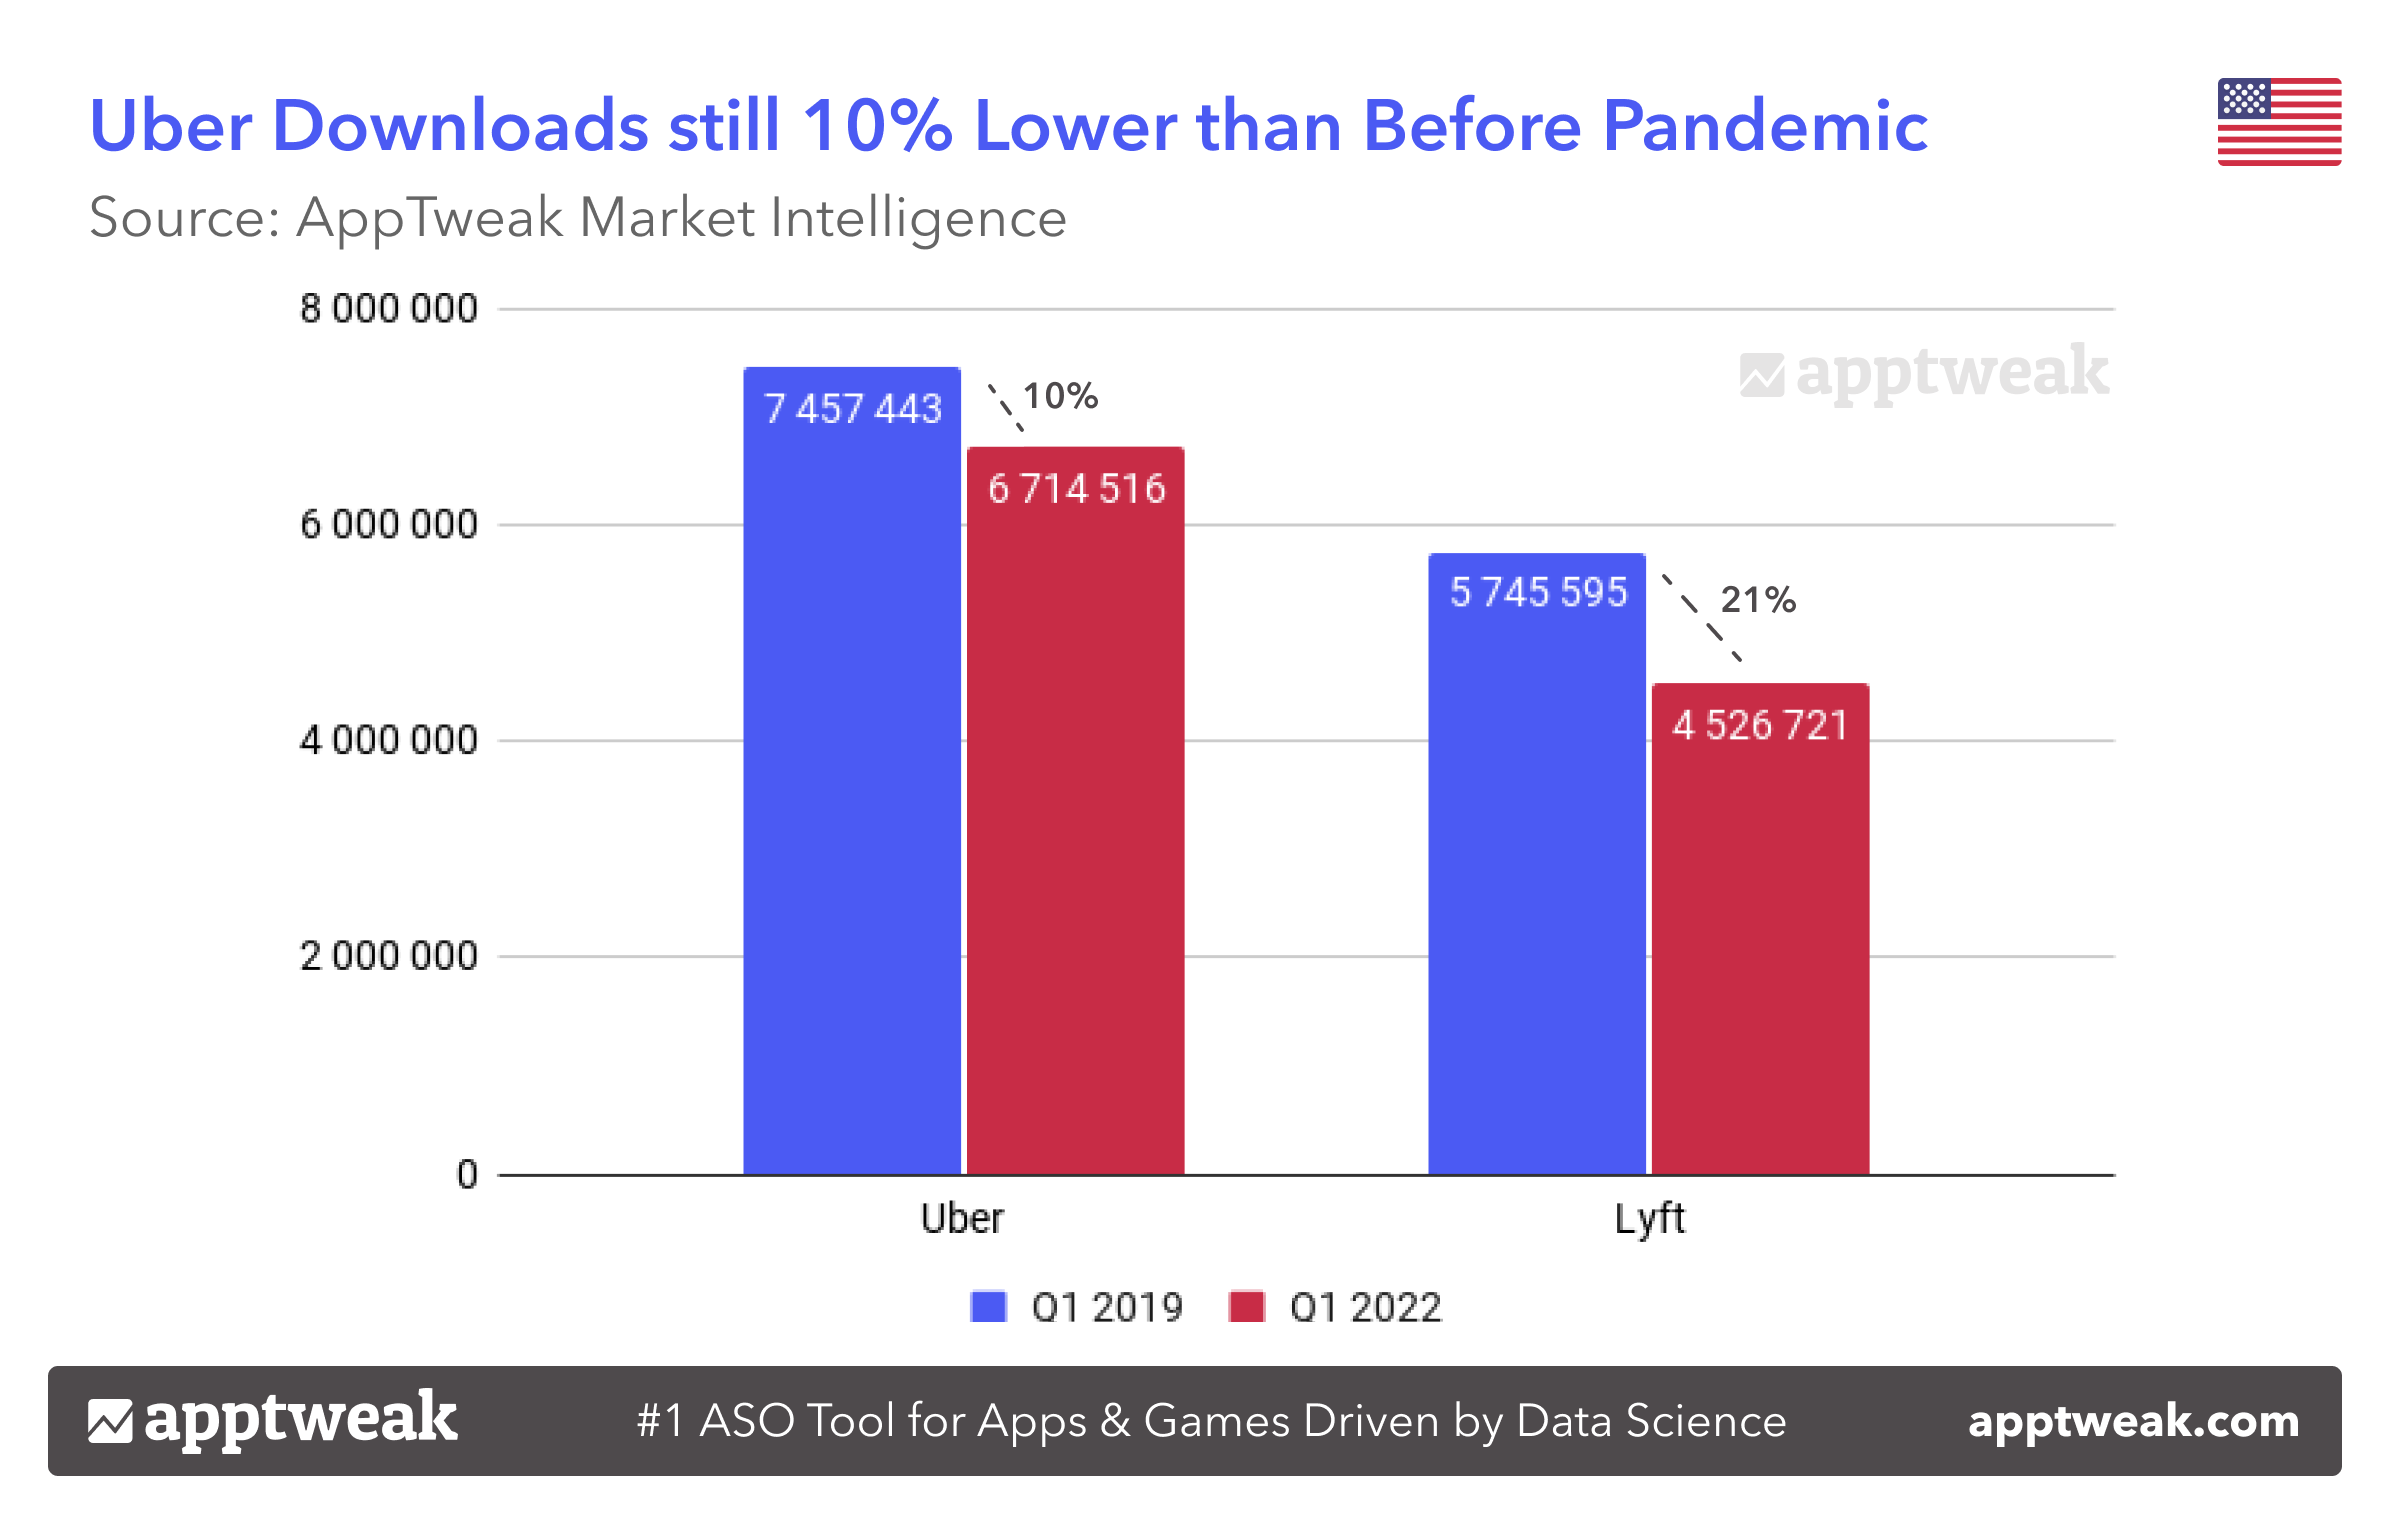 Uber Downloads Still 10% Lower than Before Pandemic 